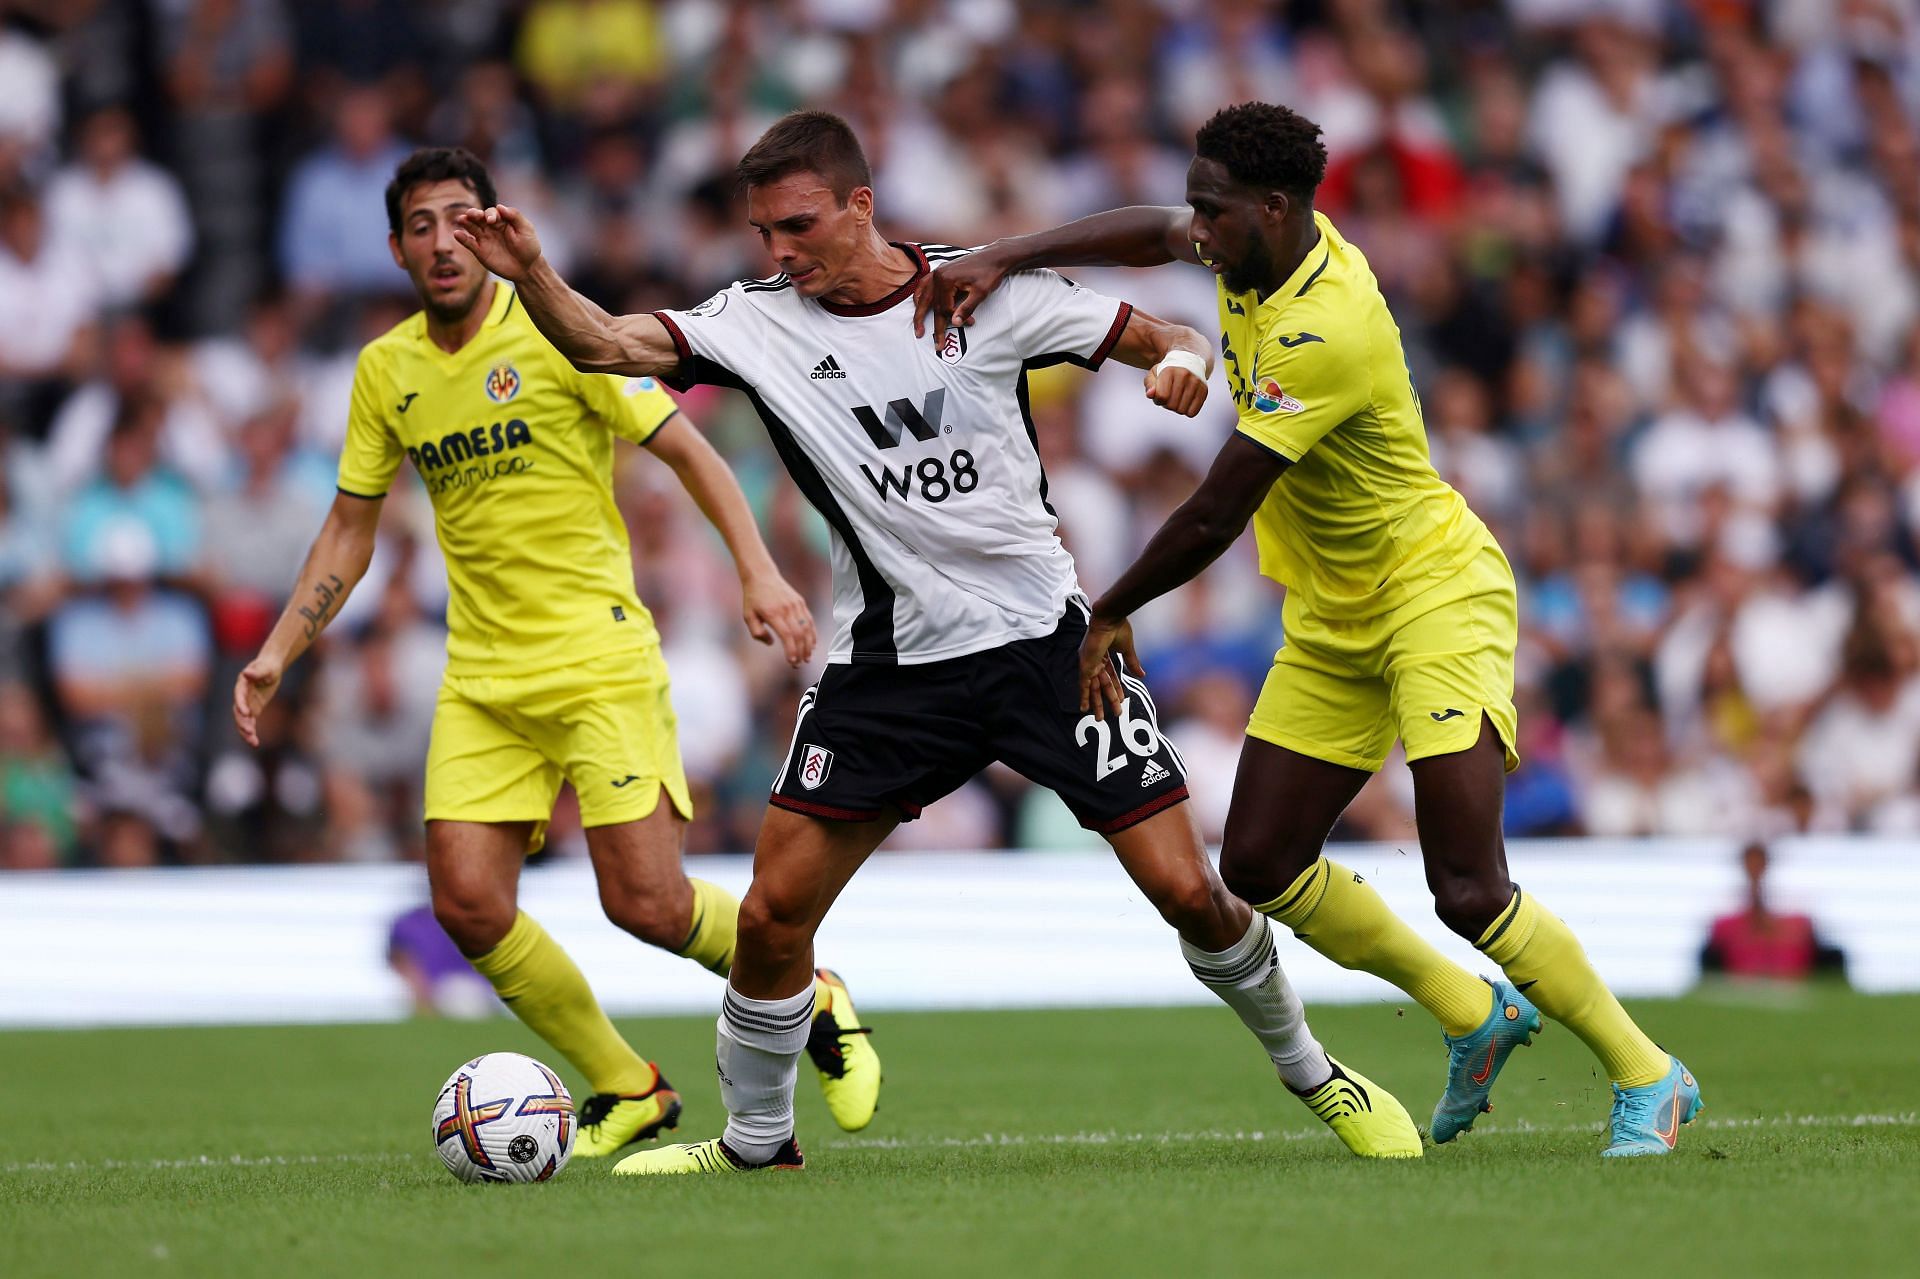 Joao Palhinha will play a key role for Fulham this season